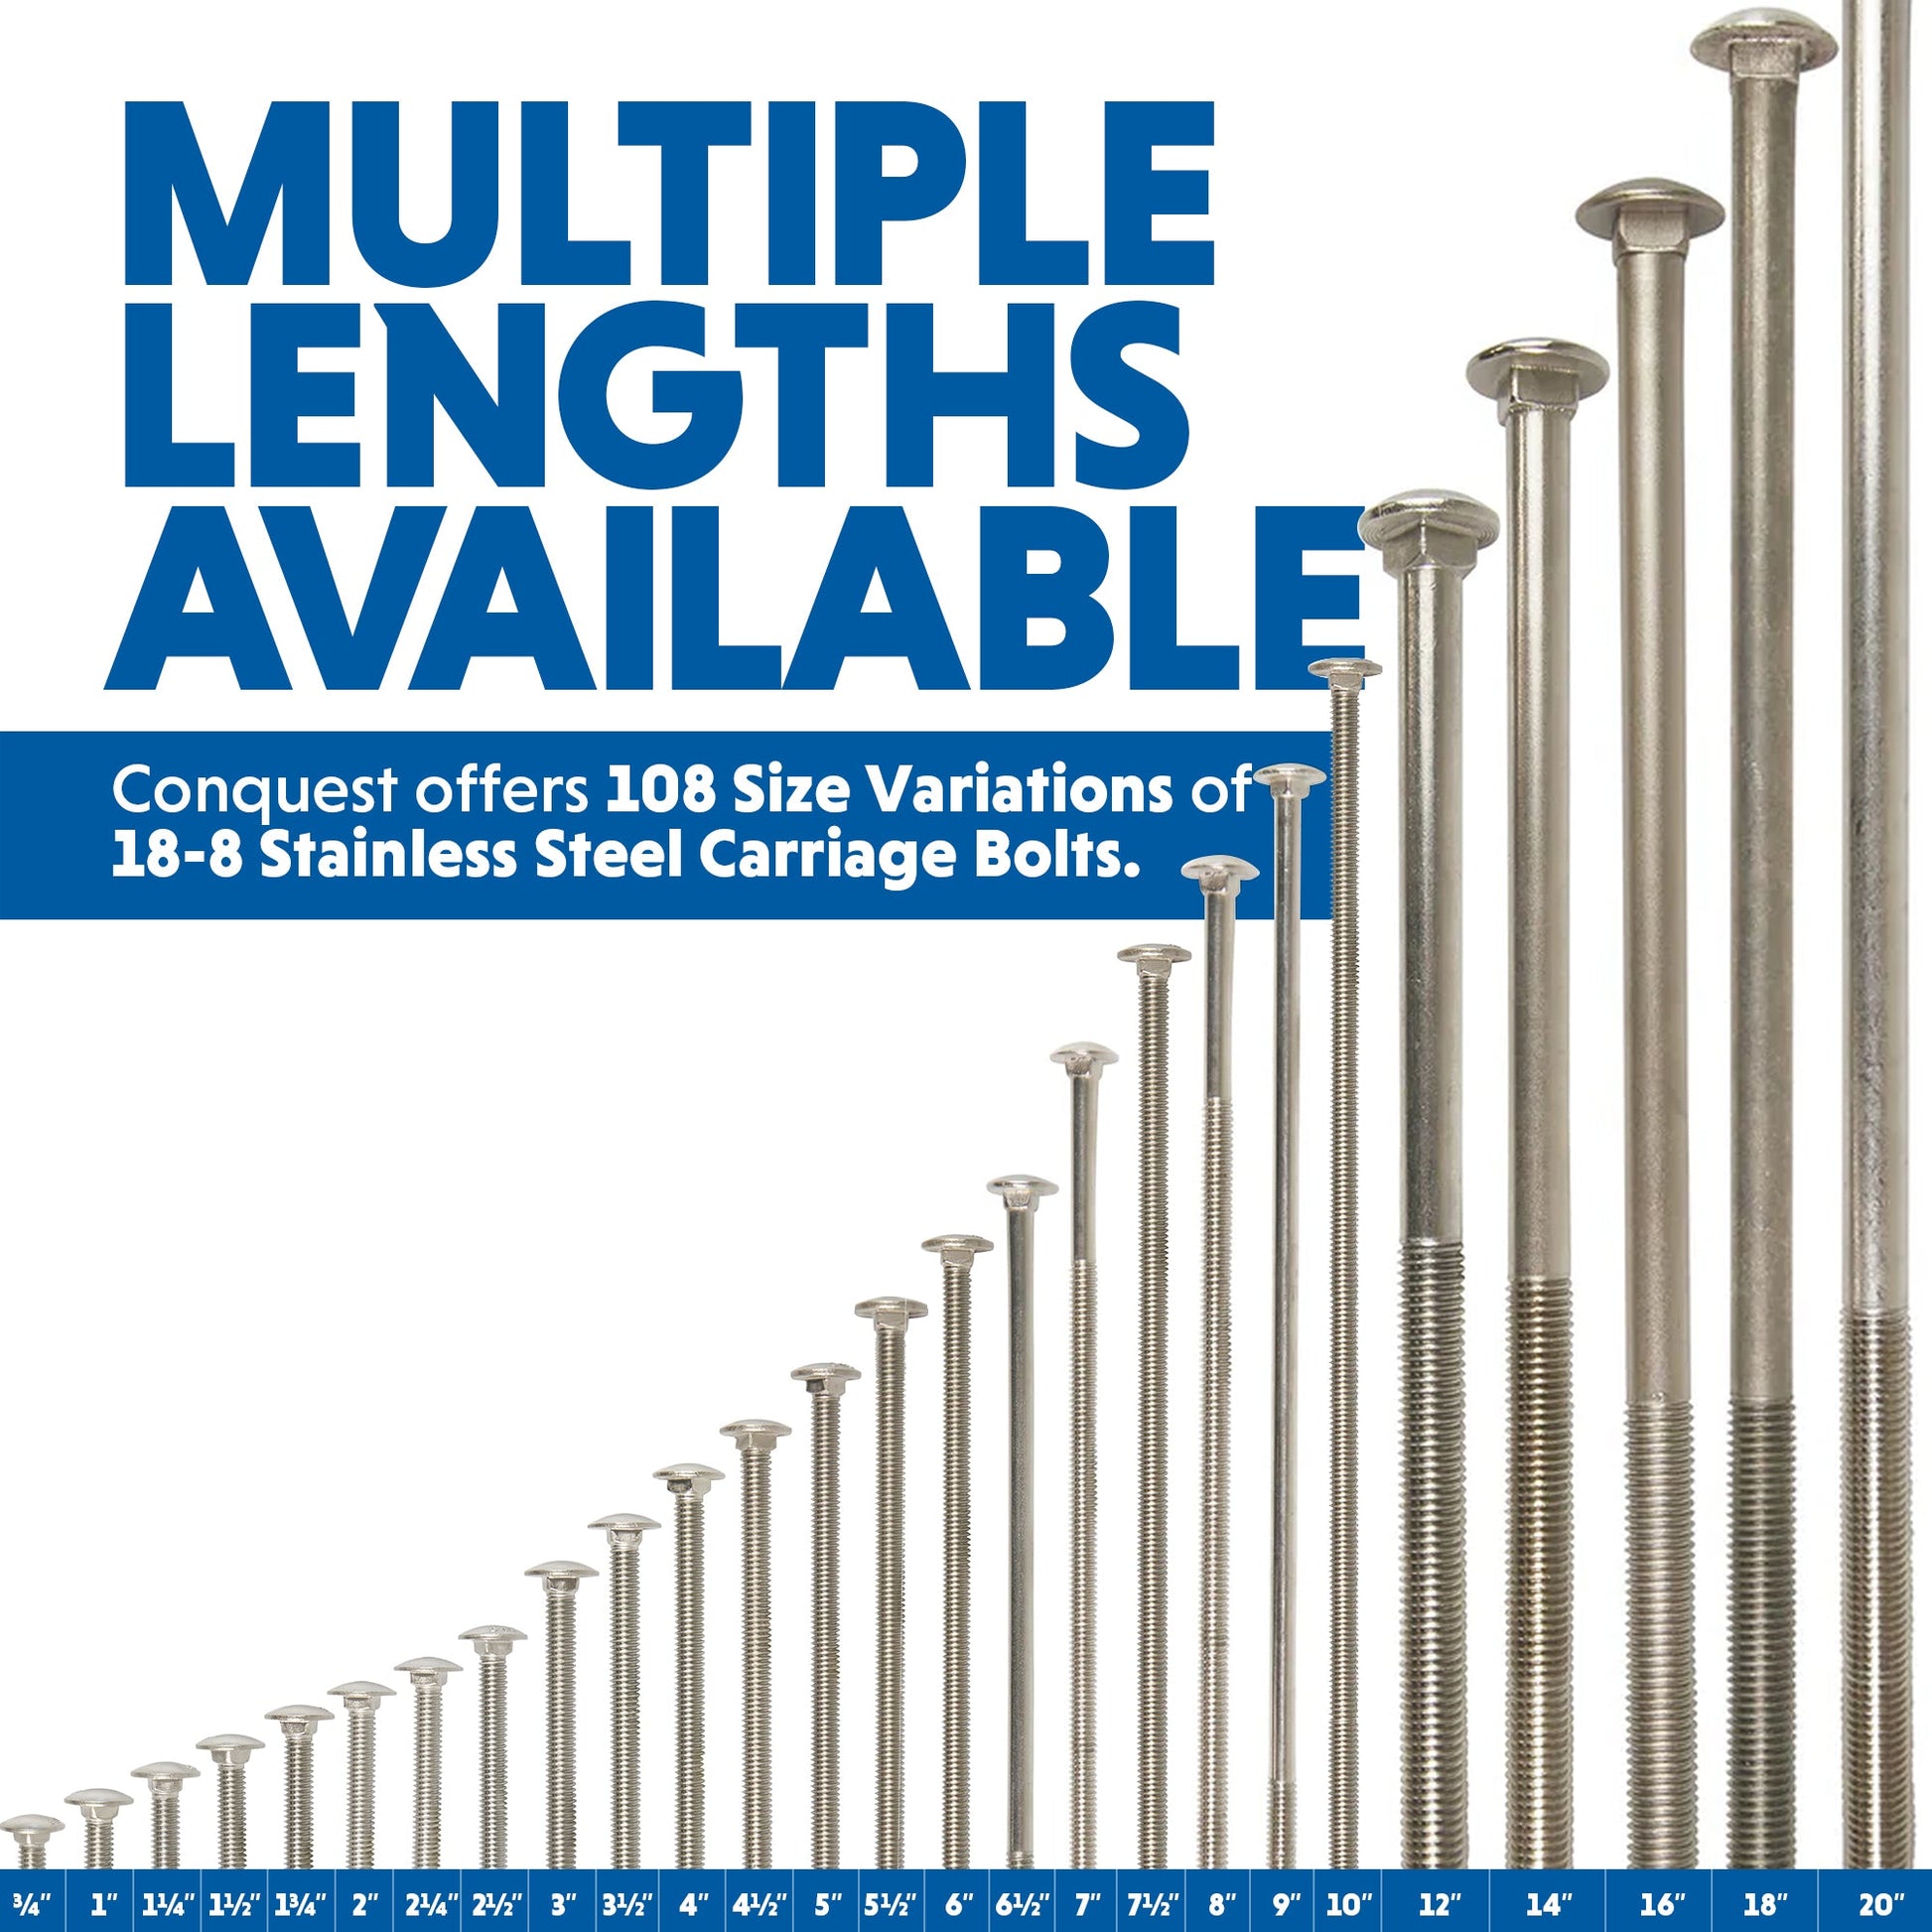 Conquest 18-8 Stainless Steel Carriage Bolts are Available in a Wide Variety of Lengths, from 3/4" to 20"